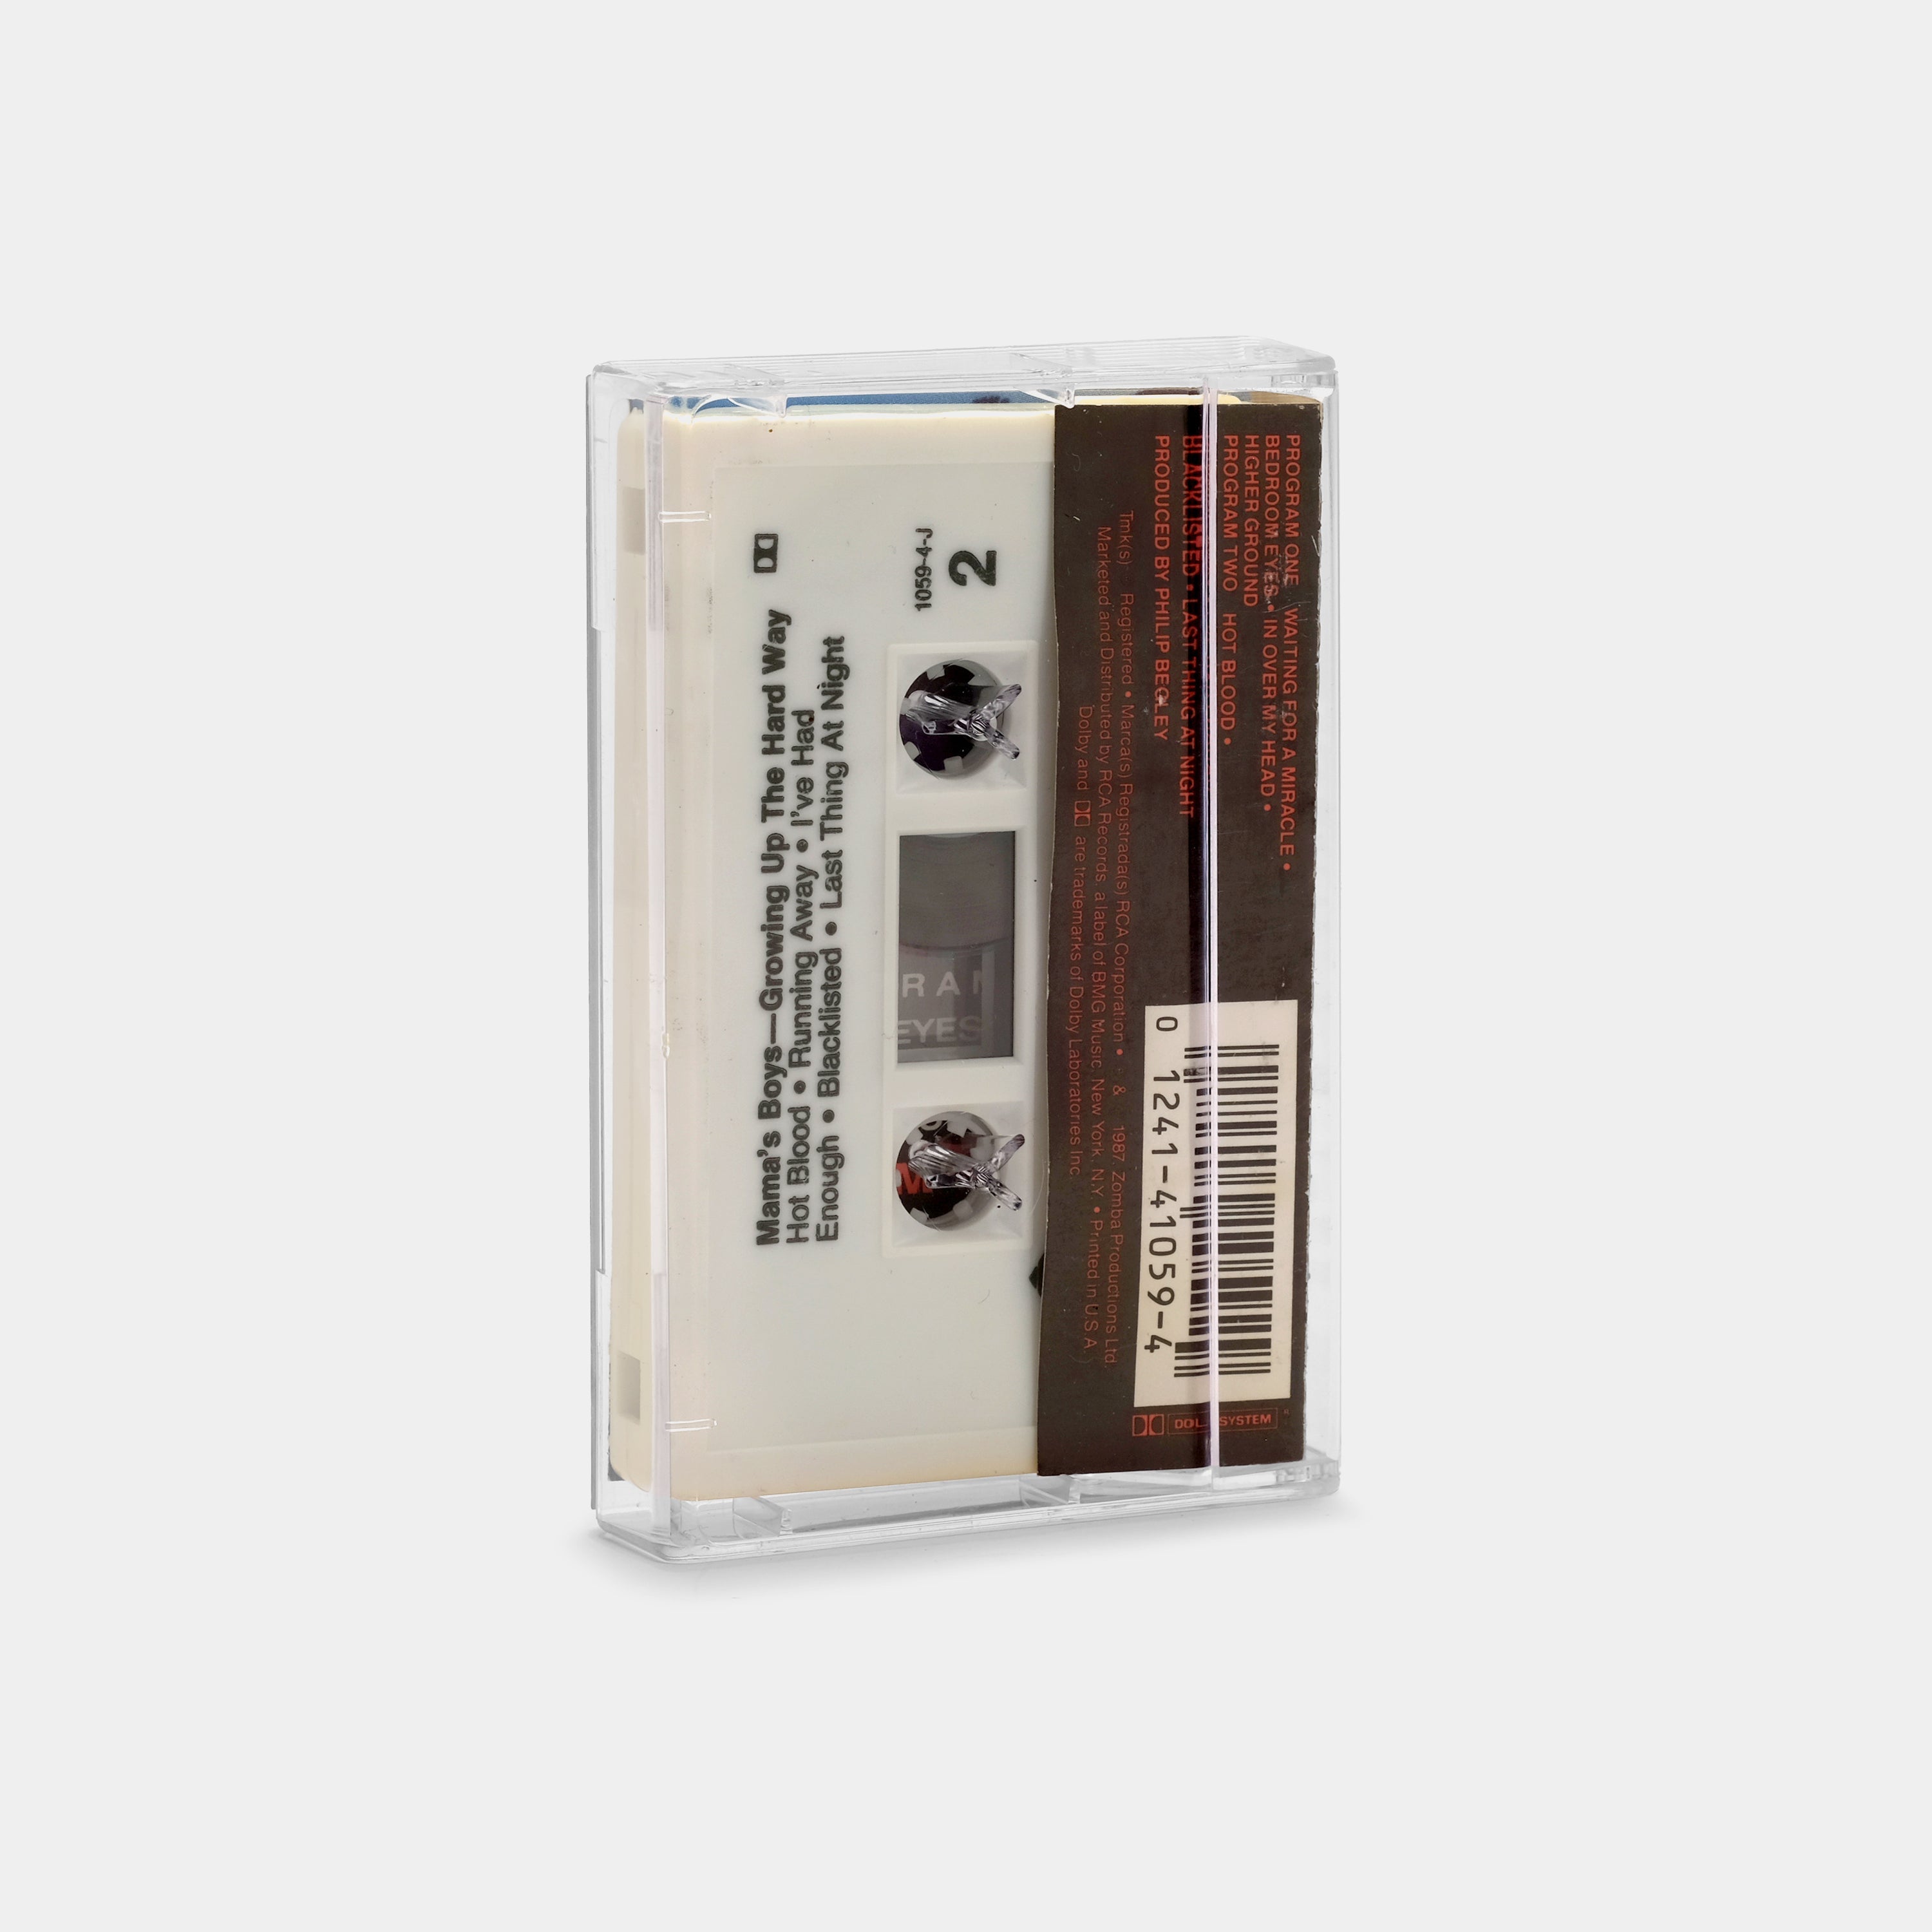 Mama's Boys - Growing Up The Hard Way Cassette Tape